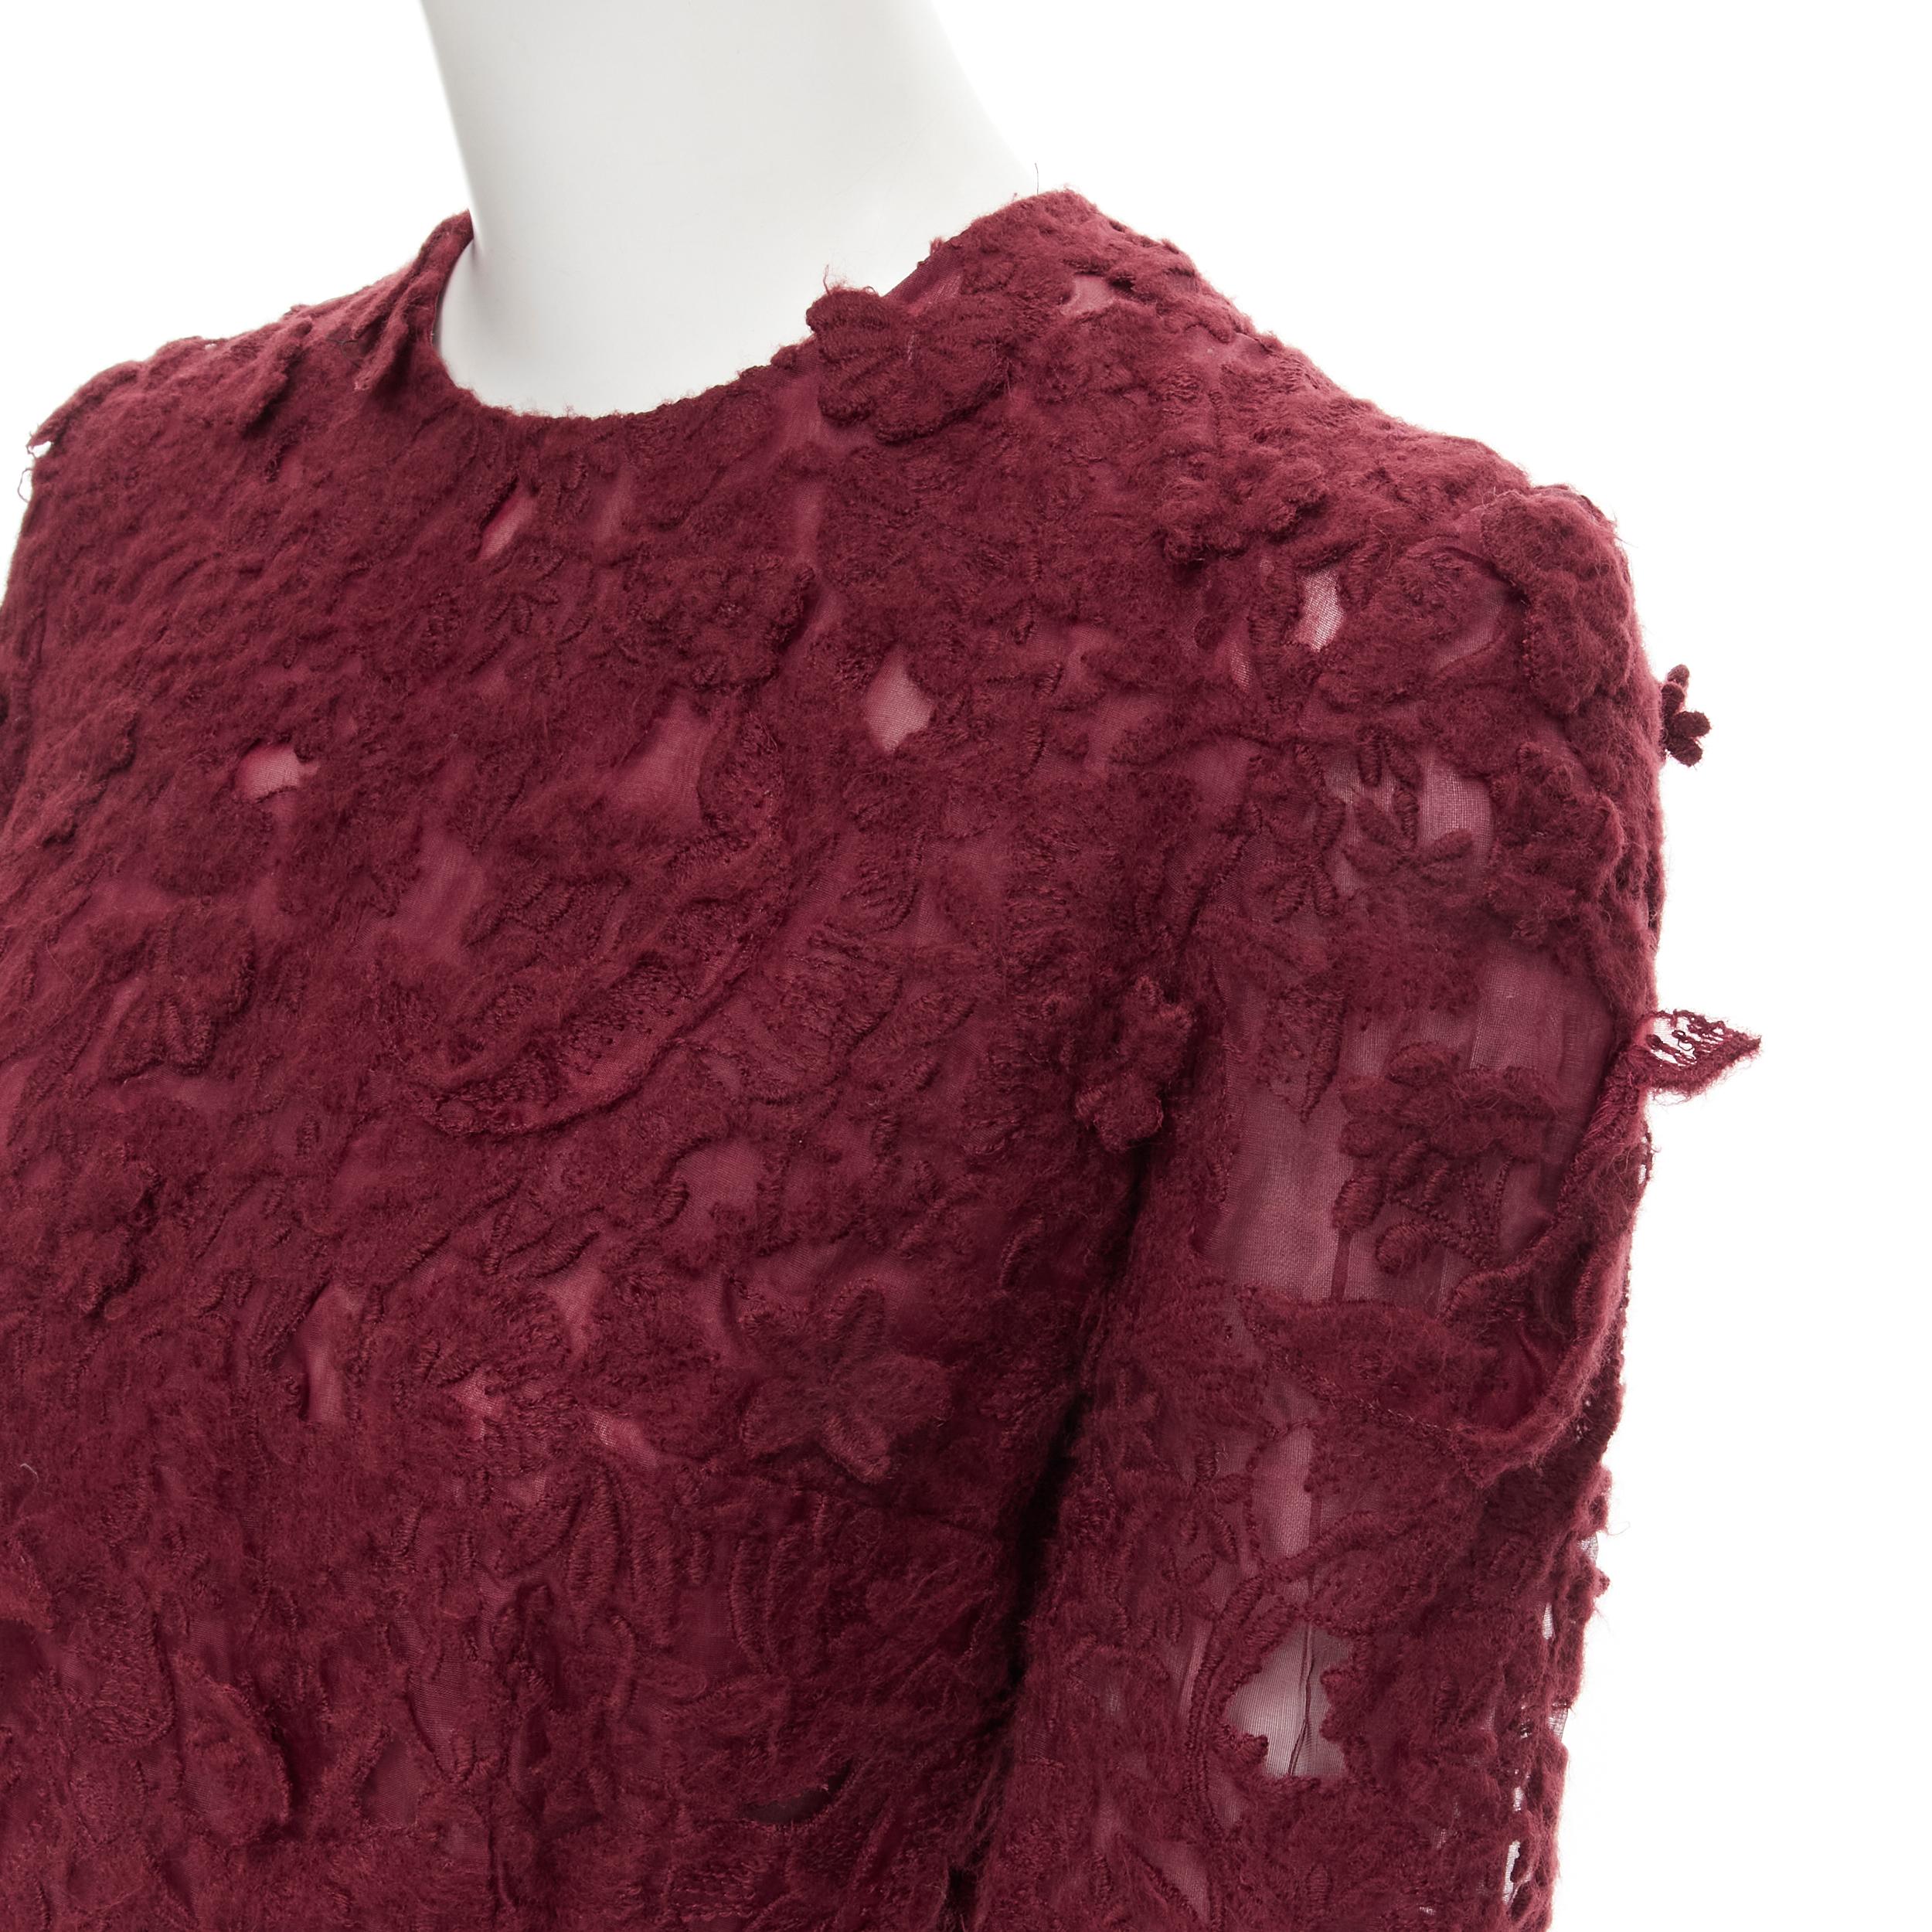 GIAMBATTISTA VALLI burgundy red floral 3D lace fit flared cocktail dress XS 
Reference: MELK/A00102 
Brand: Giambattista Valli 
Collection: 2014 
Material: Lace 
Color: Burgundy 
Pattern: Solid 
Closure: Zip 
Extra Detail: 3D embroidery floral on